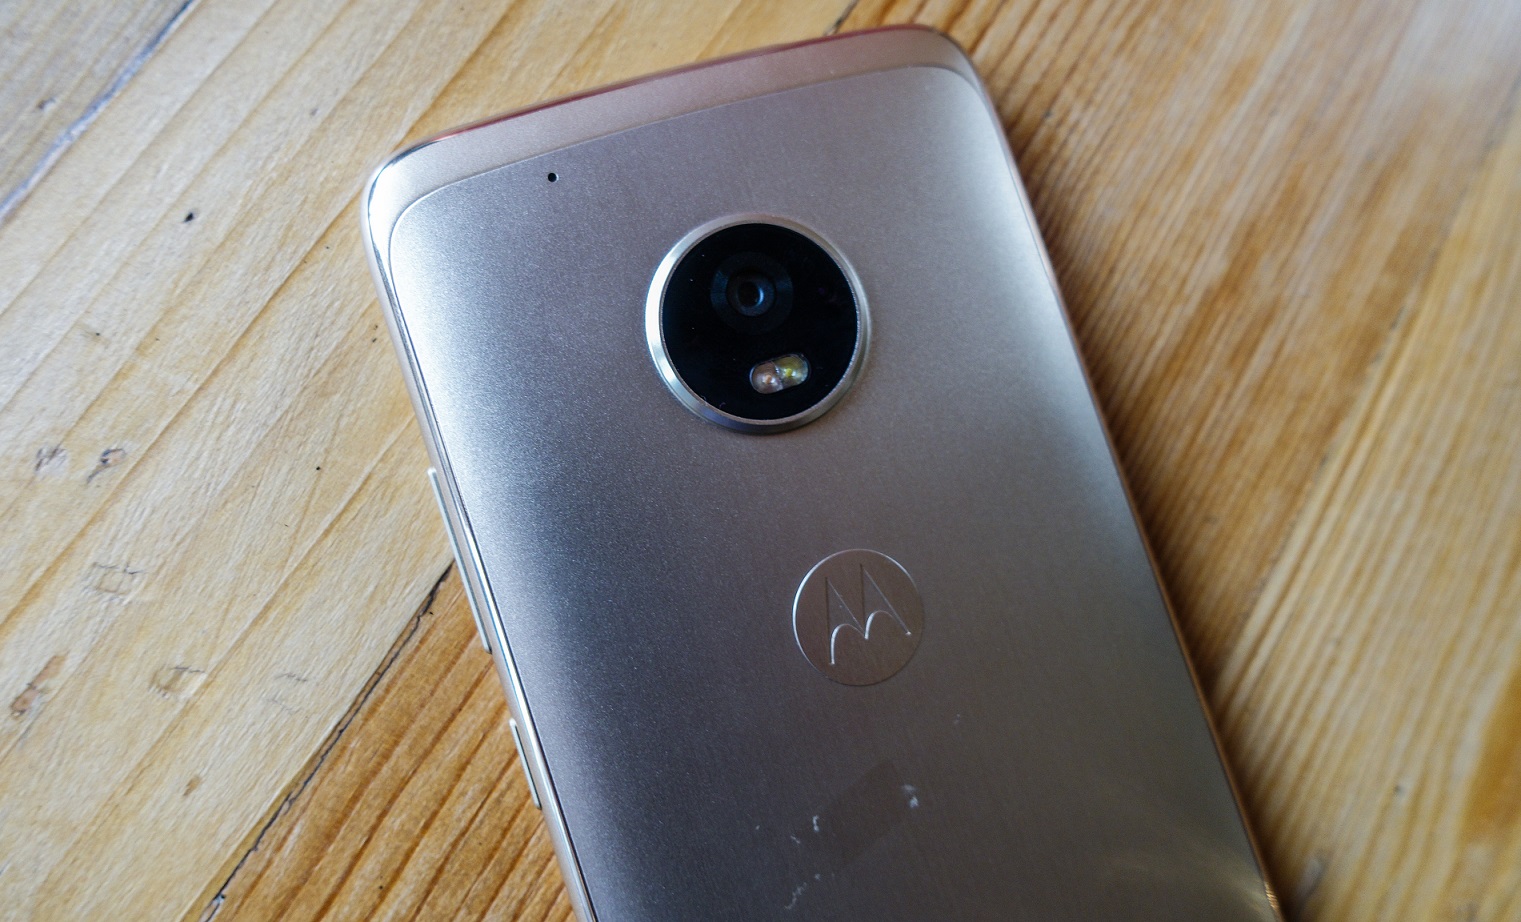 Motorola shifts the goal posts for value phones with new Moto G5 Plus